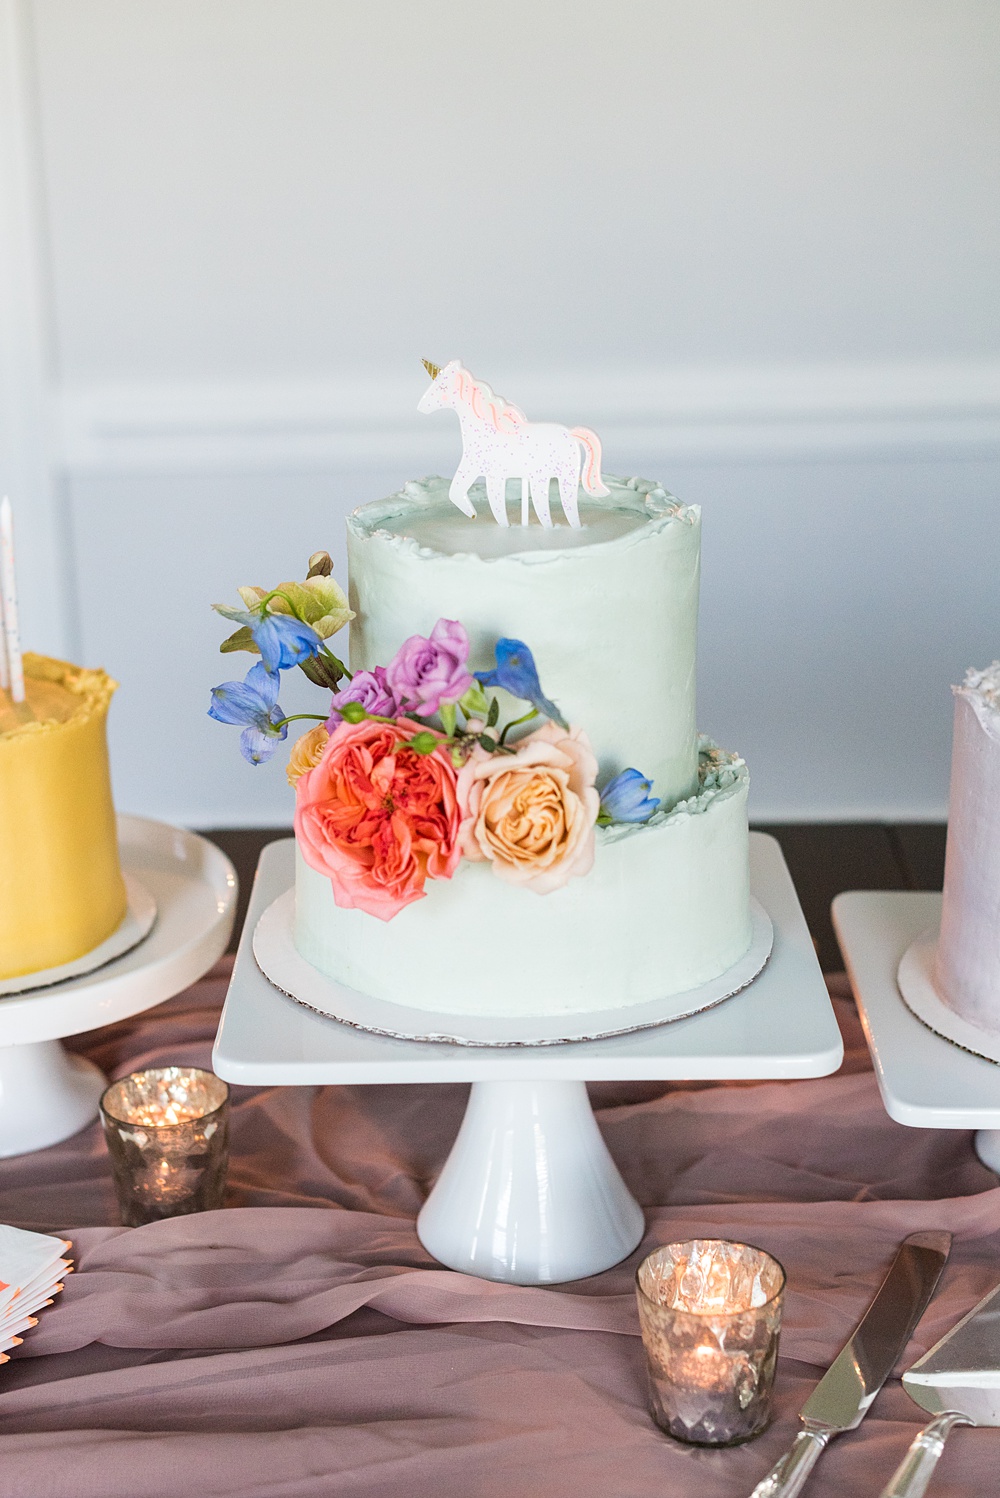 Step inside this colorful outdoor bohemian thirtieth birthday party. Full of color, lush garden flowers, and the yummiest vegan unicorn confetti cakes you ever did find! Click through for the details. Mikkel Paige Photography #gardenparty #birthdayparty #bohemianparty #unicornparty #styledshoot #backyardparty #flowers | glitterinc.com | @glitterinc